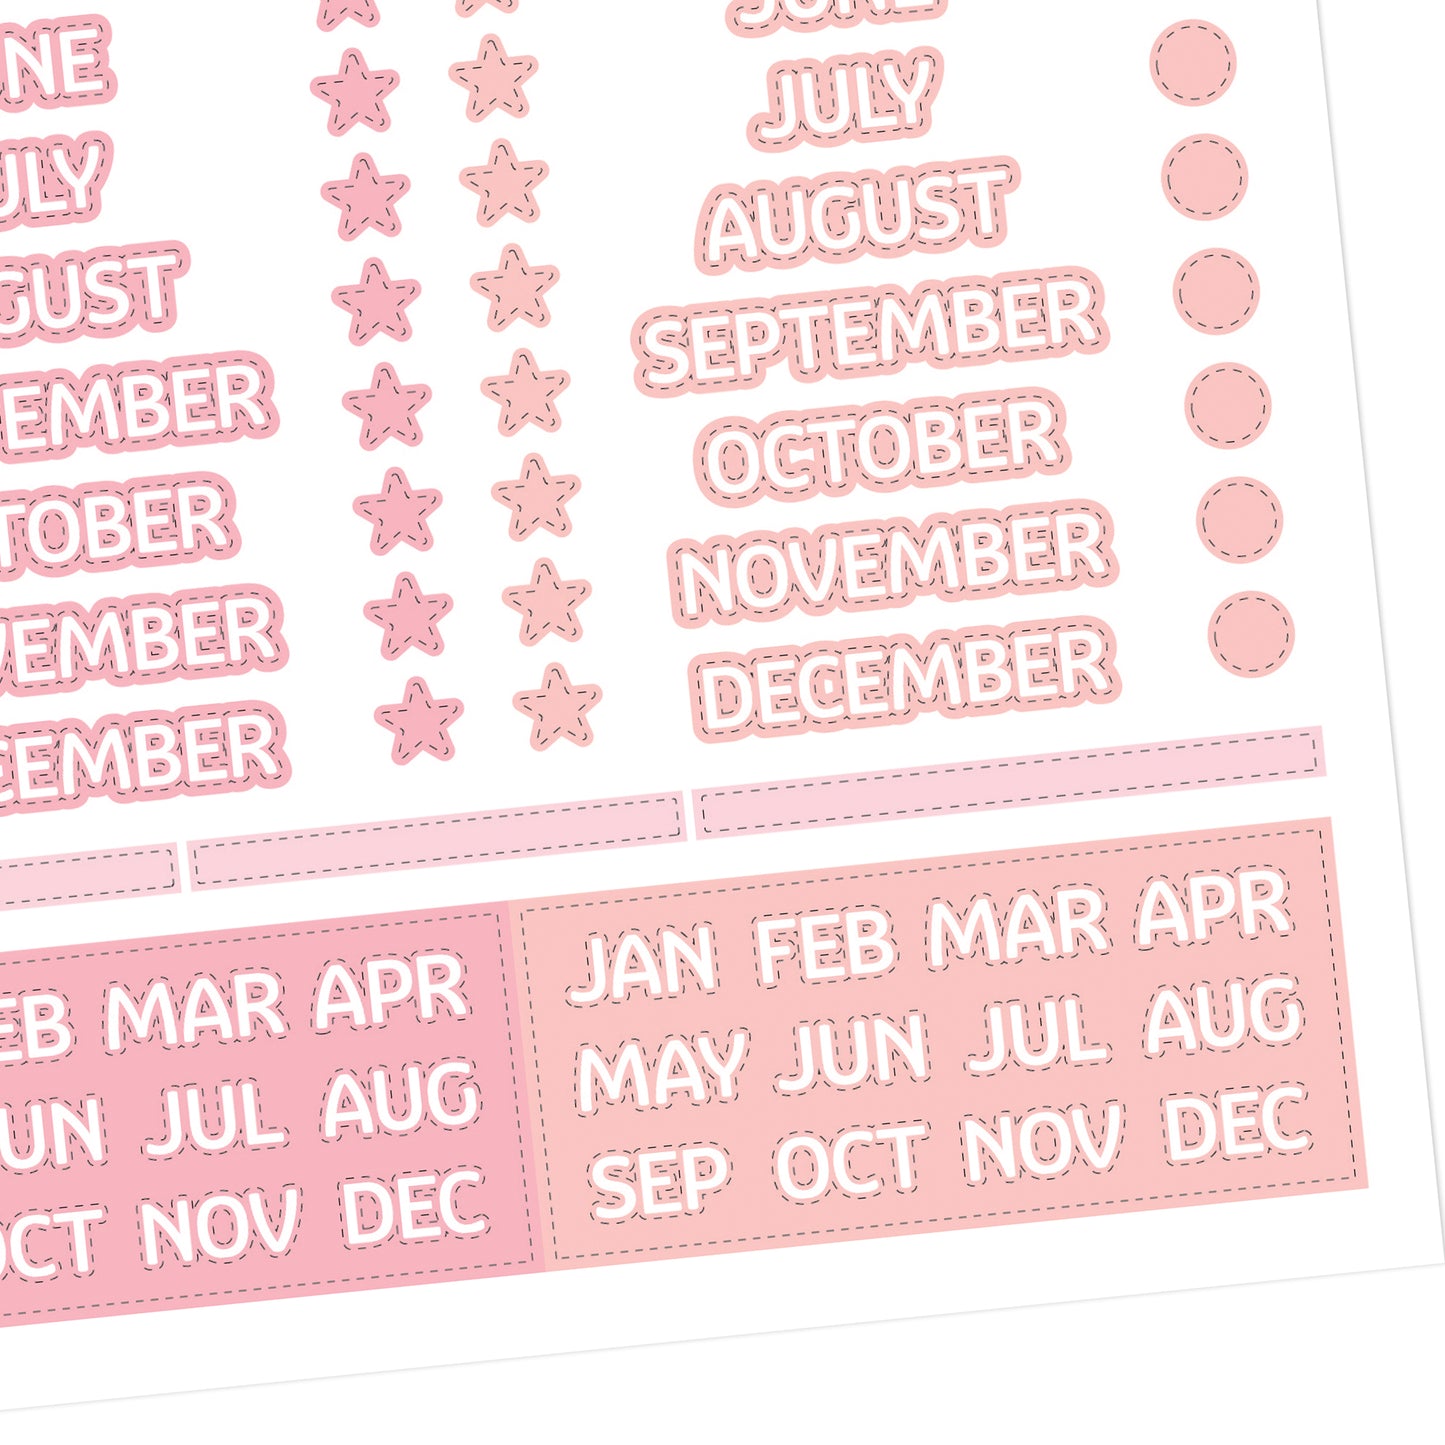 A5 Months Of The Year In Capital Stickers - 5.3" X 8.3" - Craft Journal Snail Mail Planner Journal Diary Paper Sticker Sheet